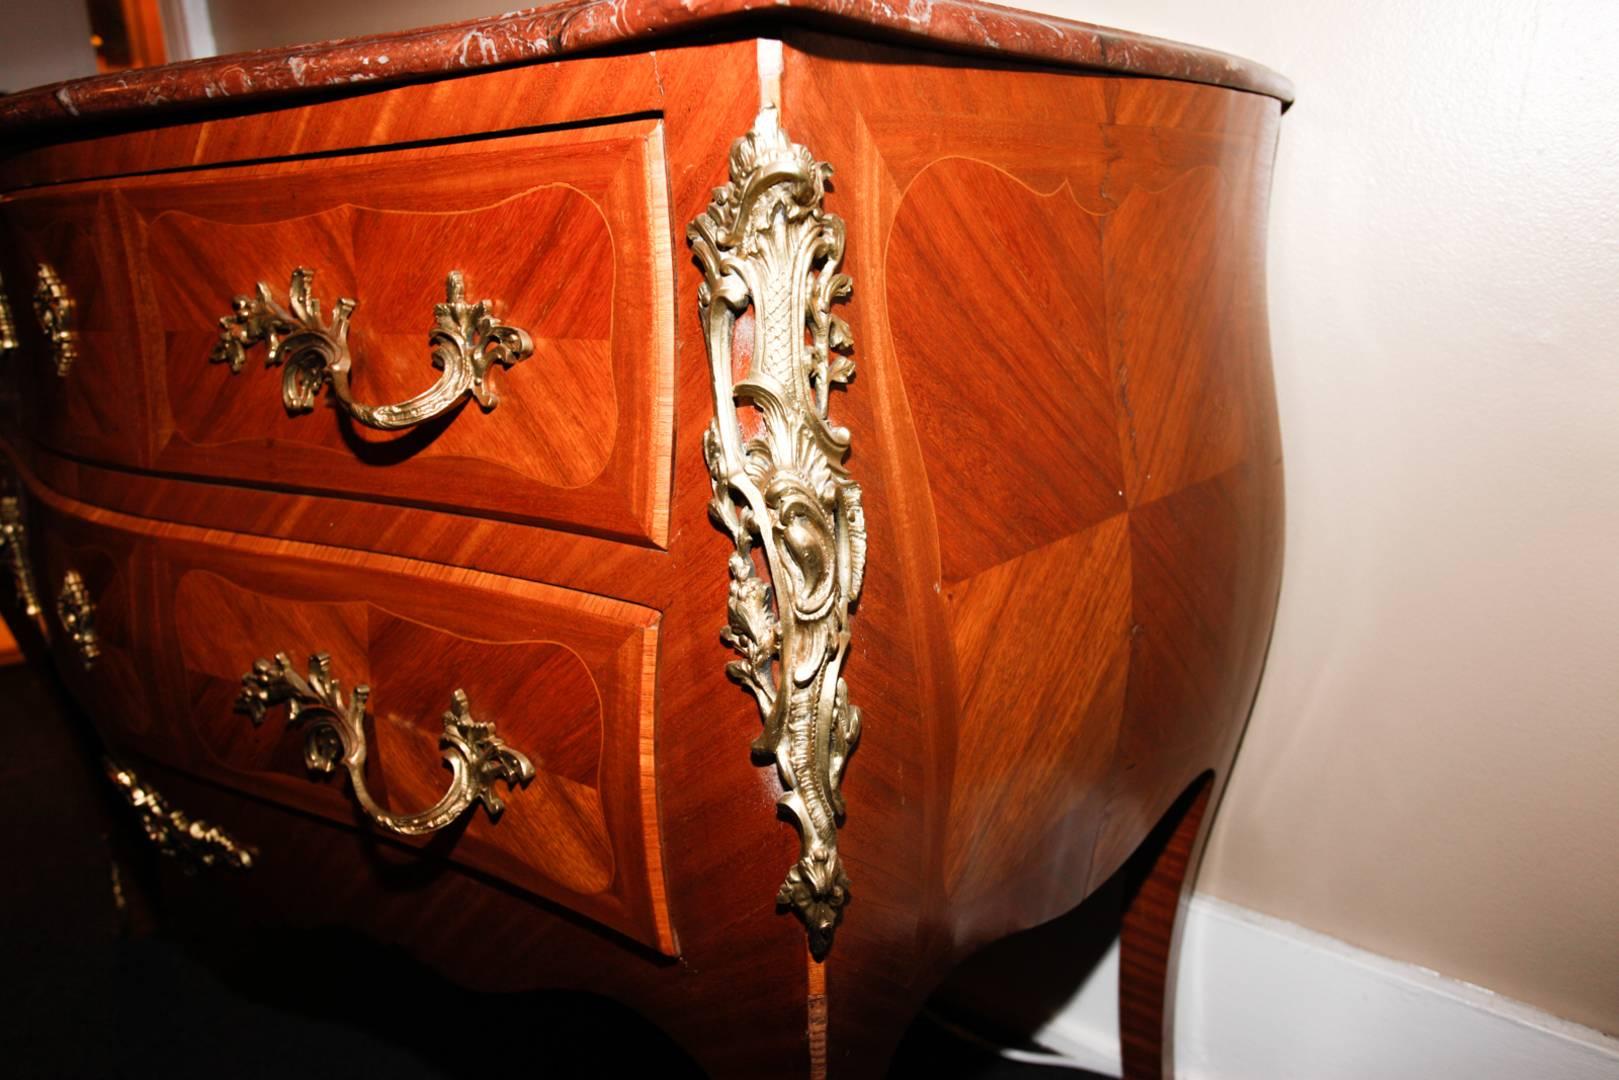 19th Century Louis XV Style Parquetry Inlaid Bombe Commode, Late 19th-Early 20th Century